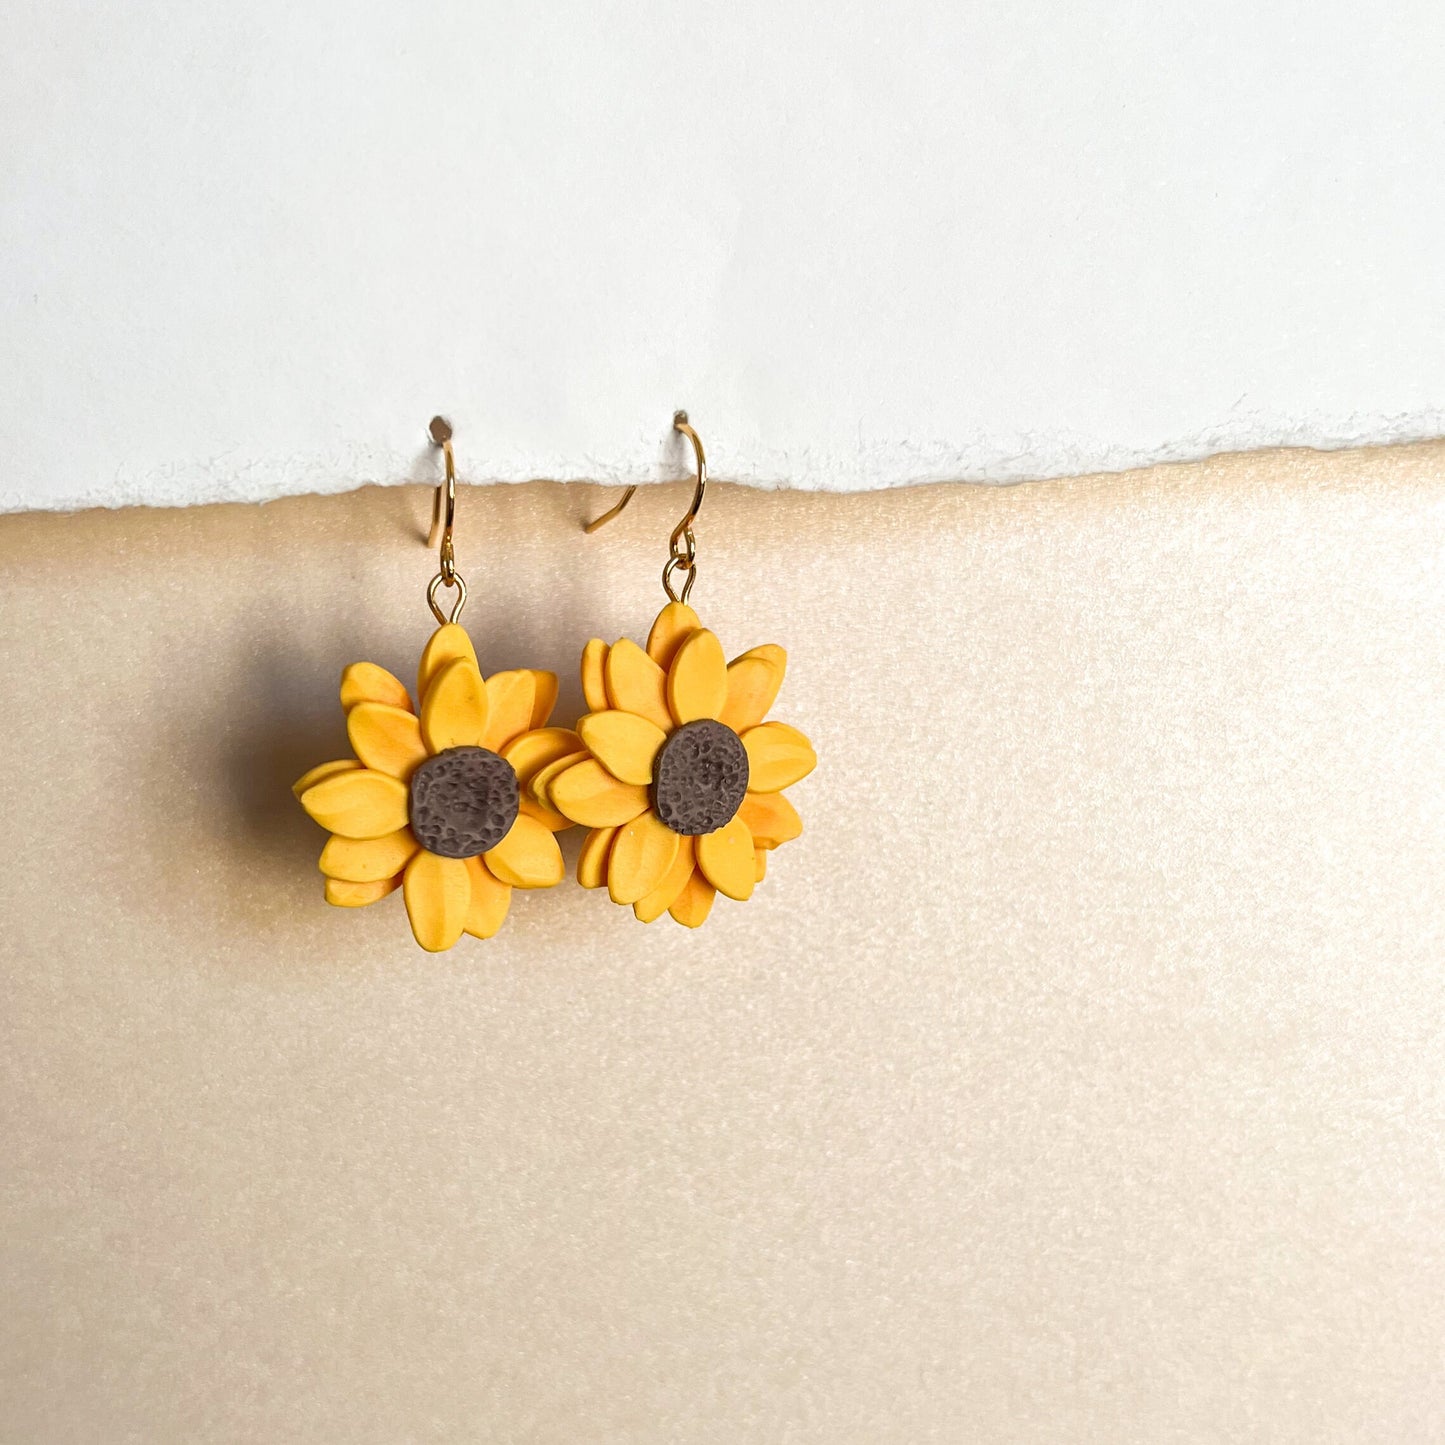 Whole sunflower earrings | 18k gold plated